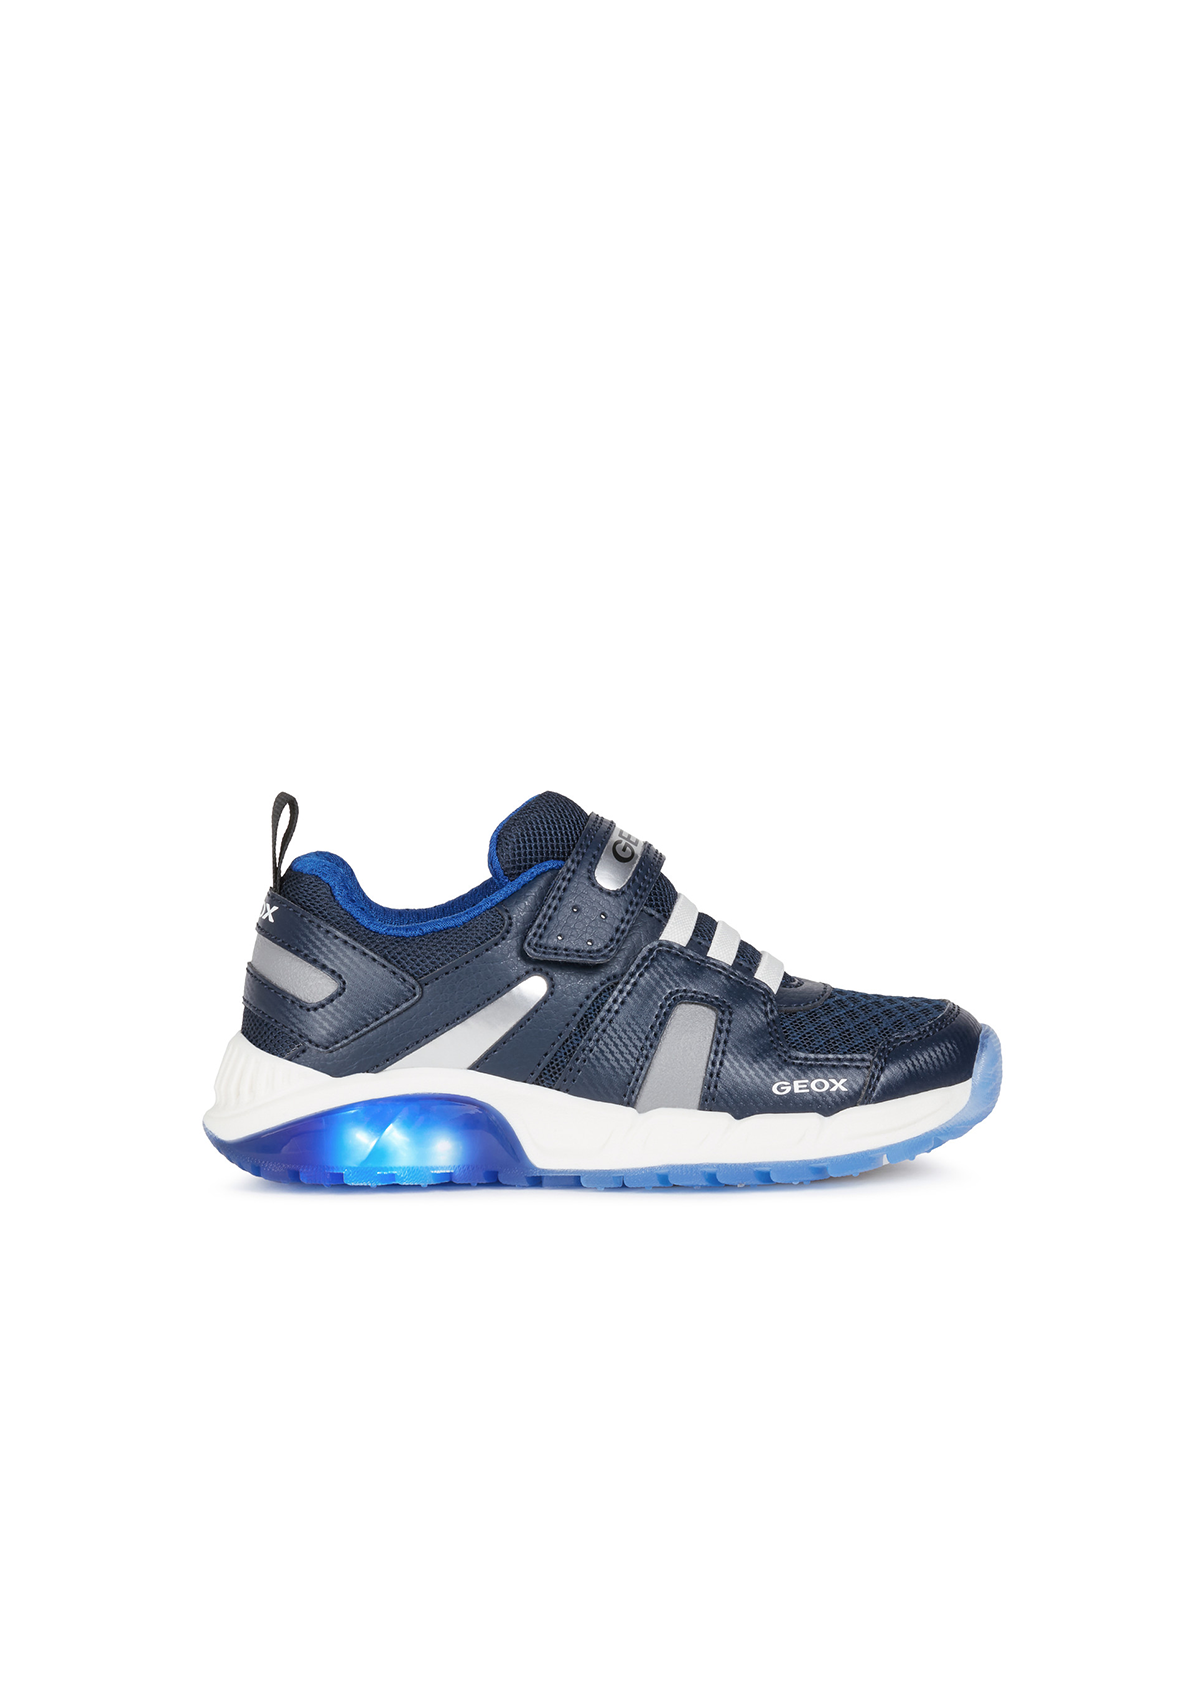 Geox Boys Trainers SPAZIALE Navy Royal